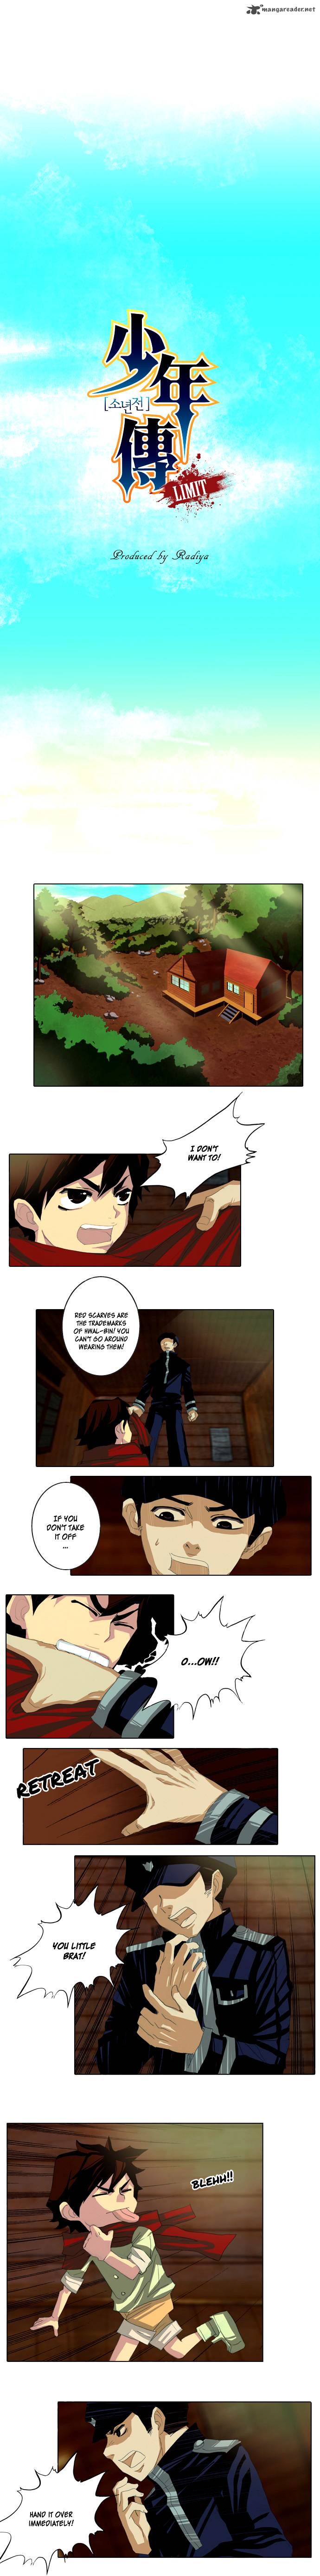 Son Yeon Jeon Limit Chapter 8 Page 3